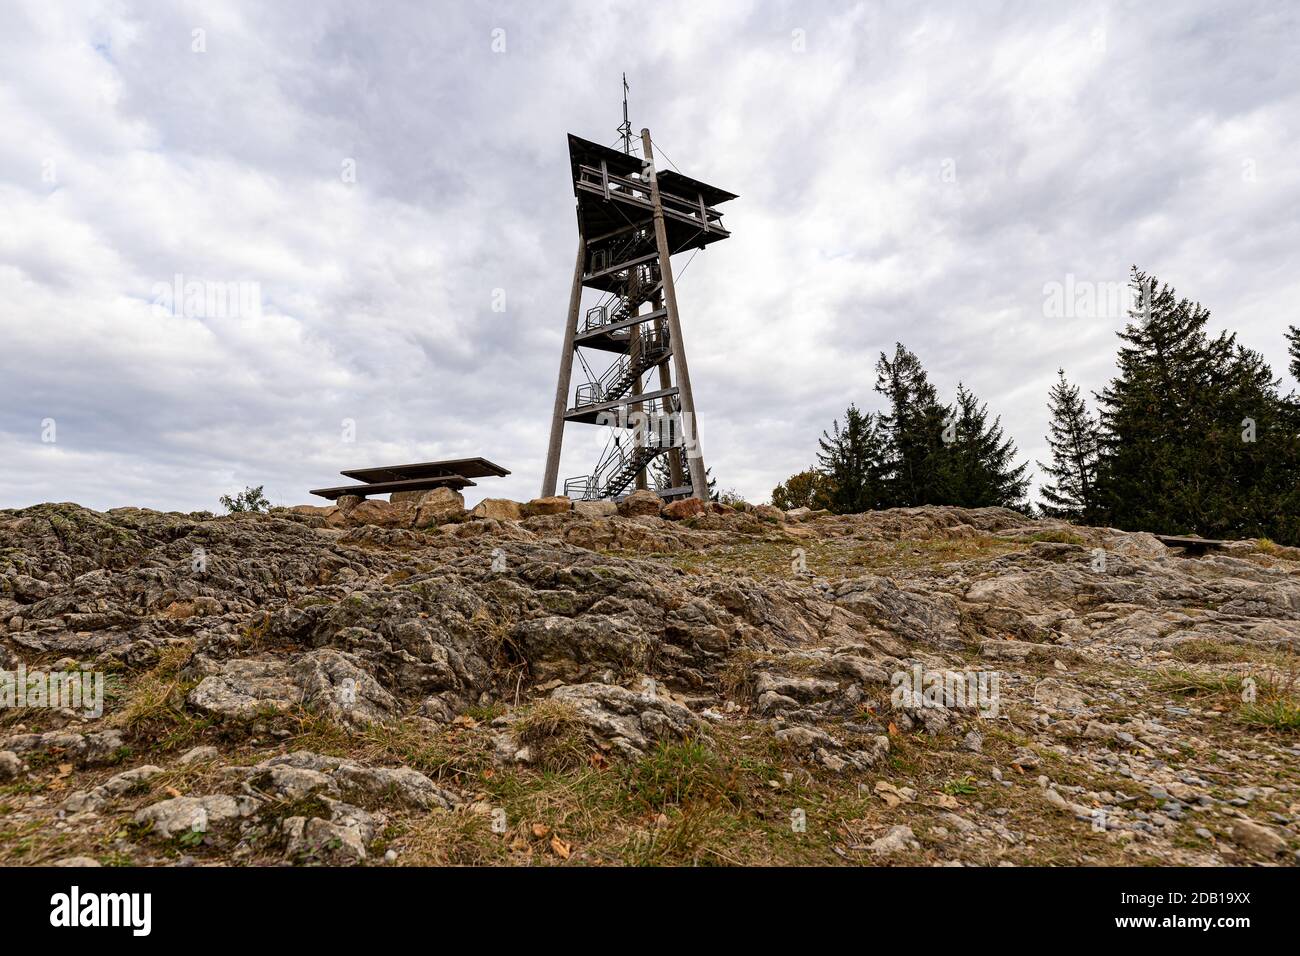 A shot of the Eugen-Keidel Tower of Germany Stock Photo